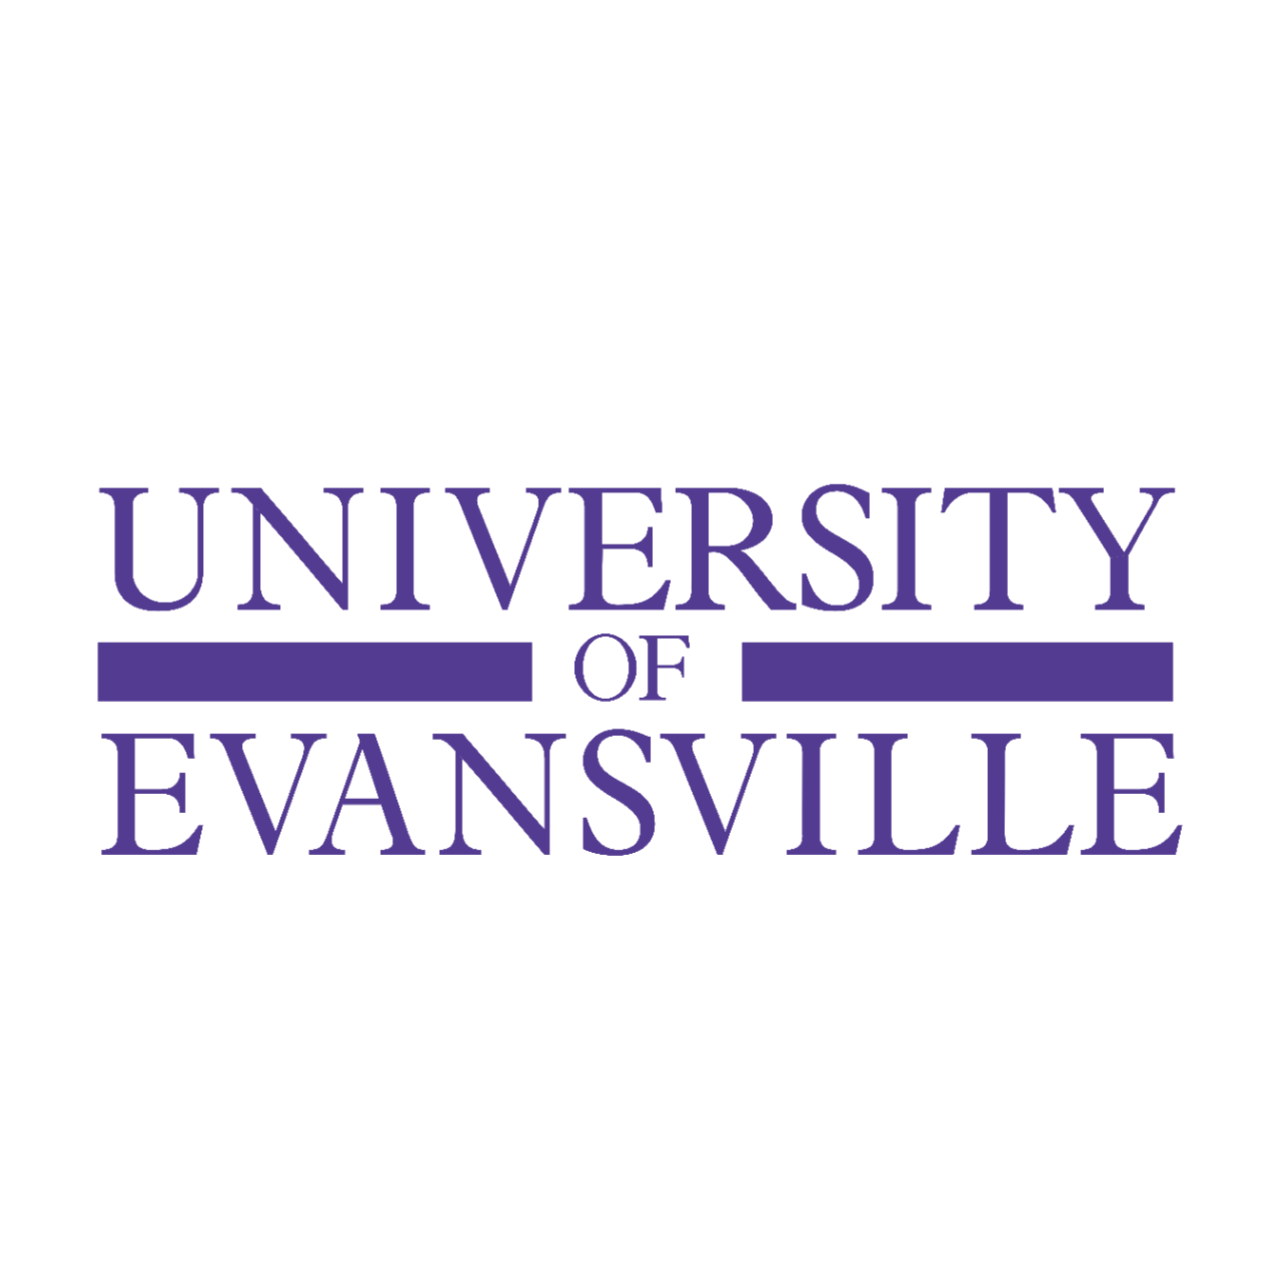 Download University of Evansville Logo PNG and Vector (PDF SVG Ai